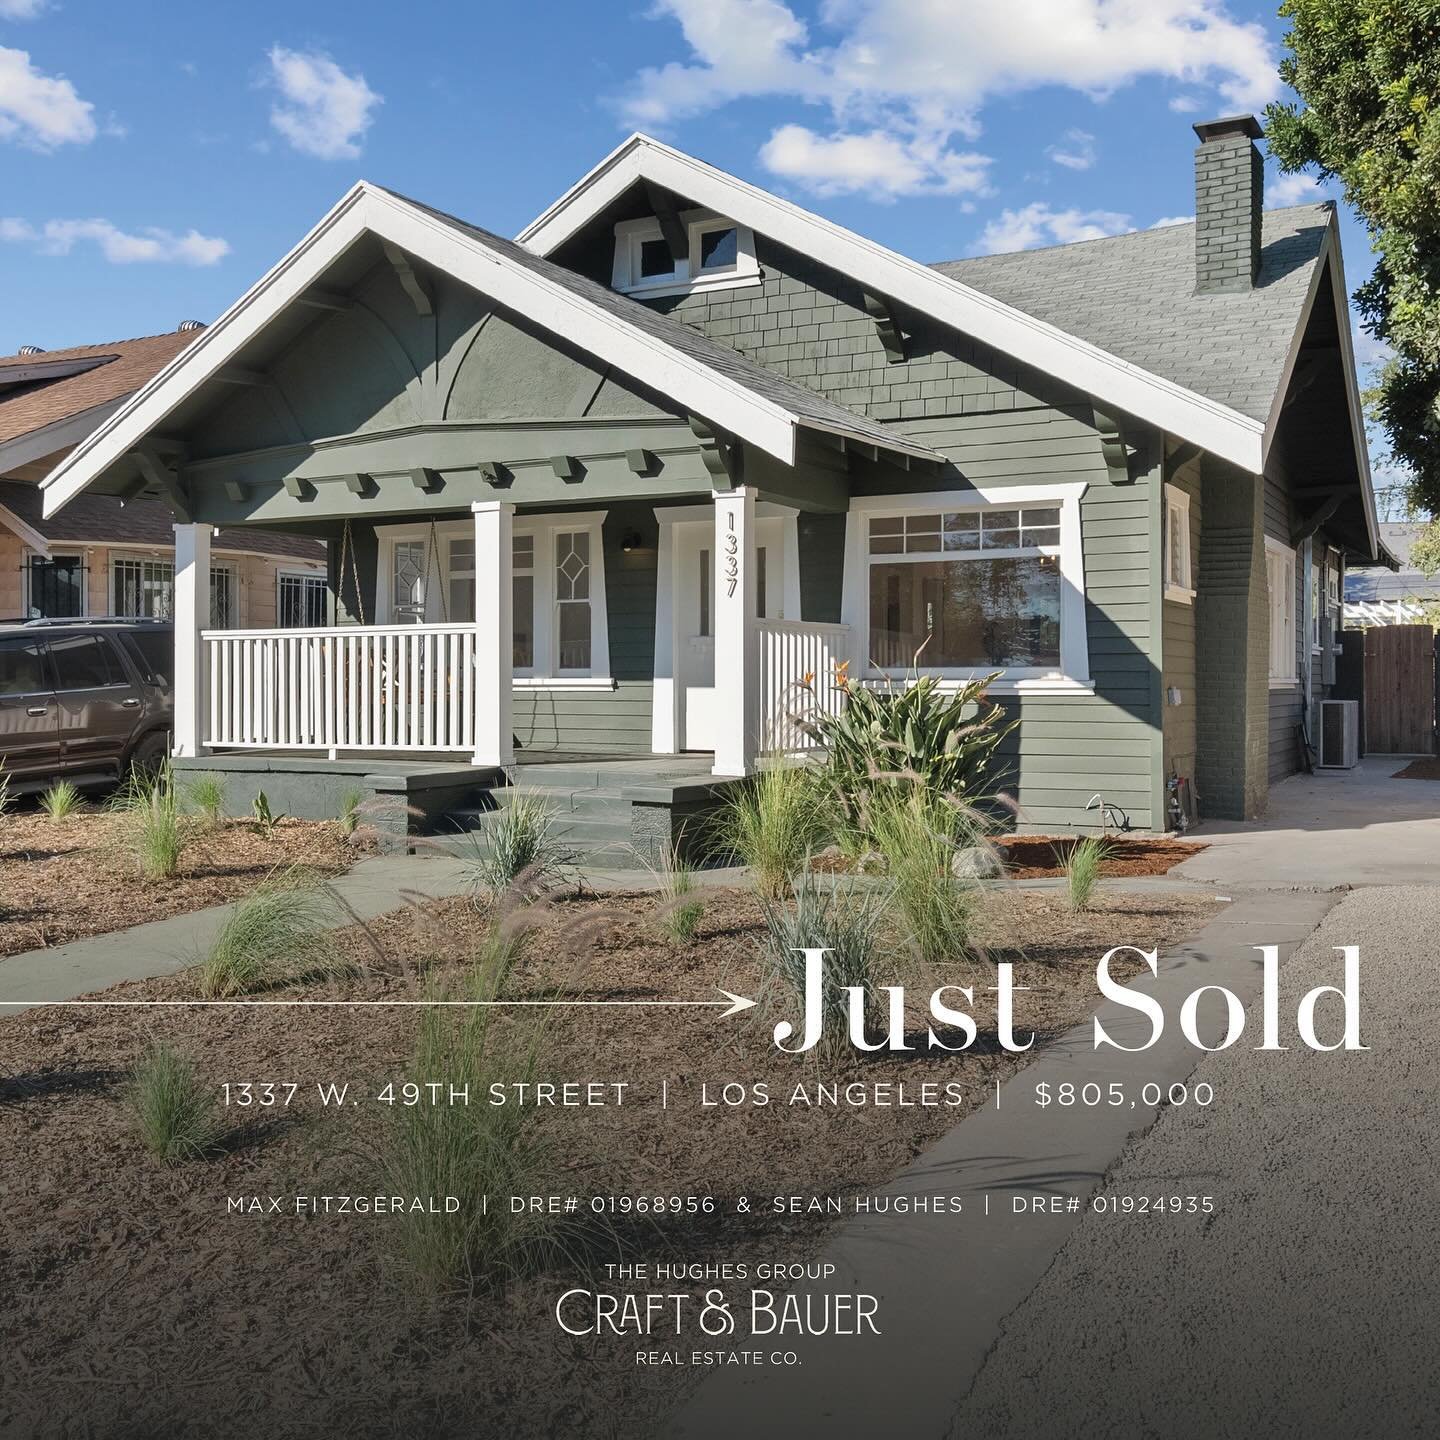 JUST SOLD 🎉 Congratulations to the new owners of this fully remodeled, beautiful 3-bedroom Craftsman! ⁠
⁠
🏡 1337 West 49th Street⁠
📍 Los Angeles, CA⁠
💰 $805,000⁠
⁠
Truly an LA Gem! The contemporary kitchen is a chef&rsquo;s dream. French doors le